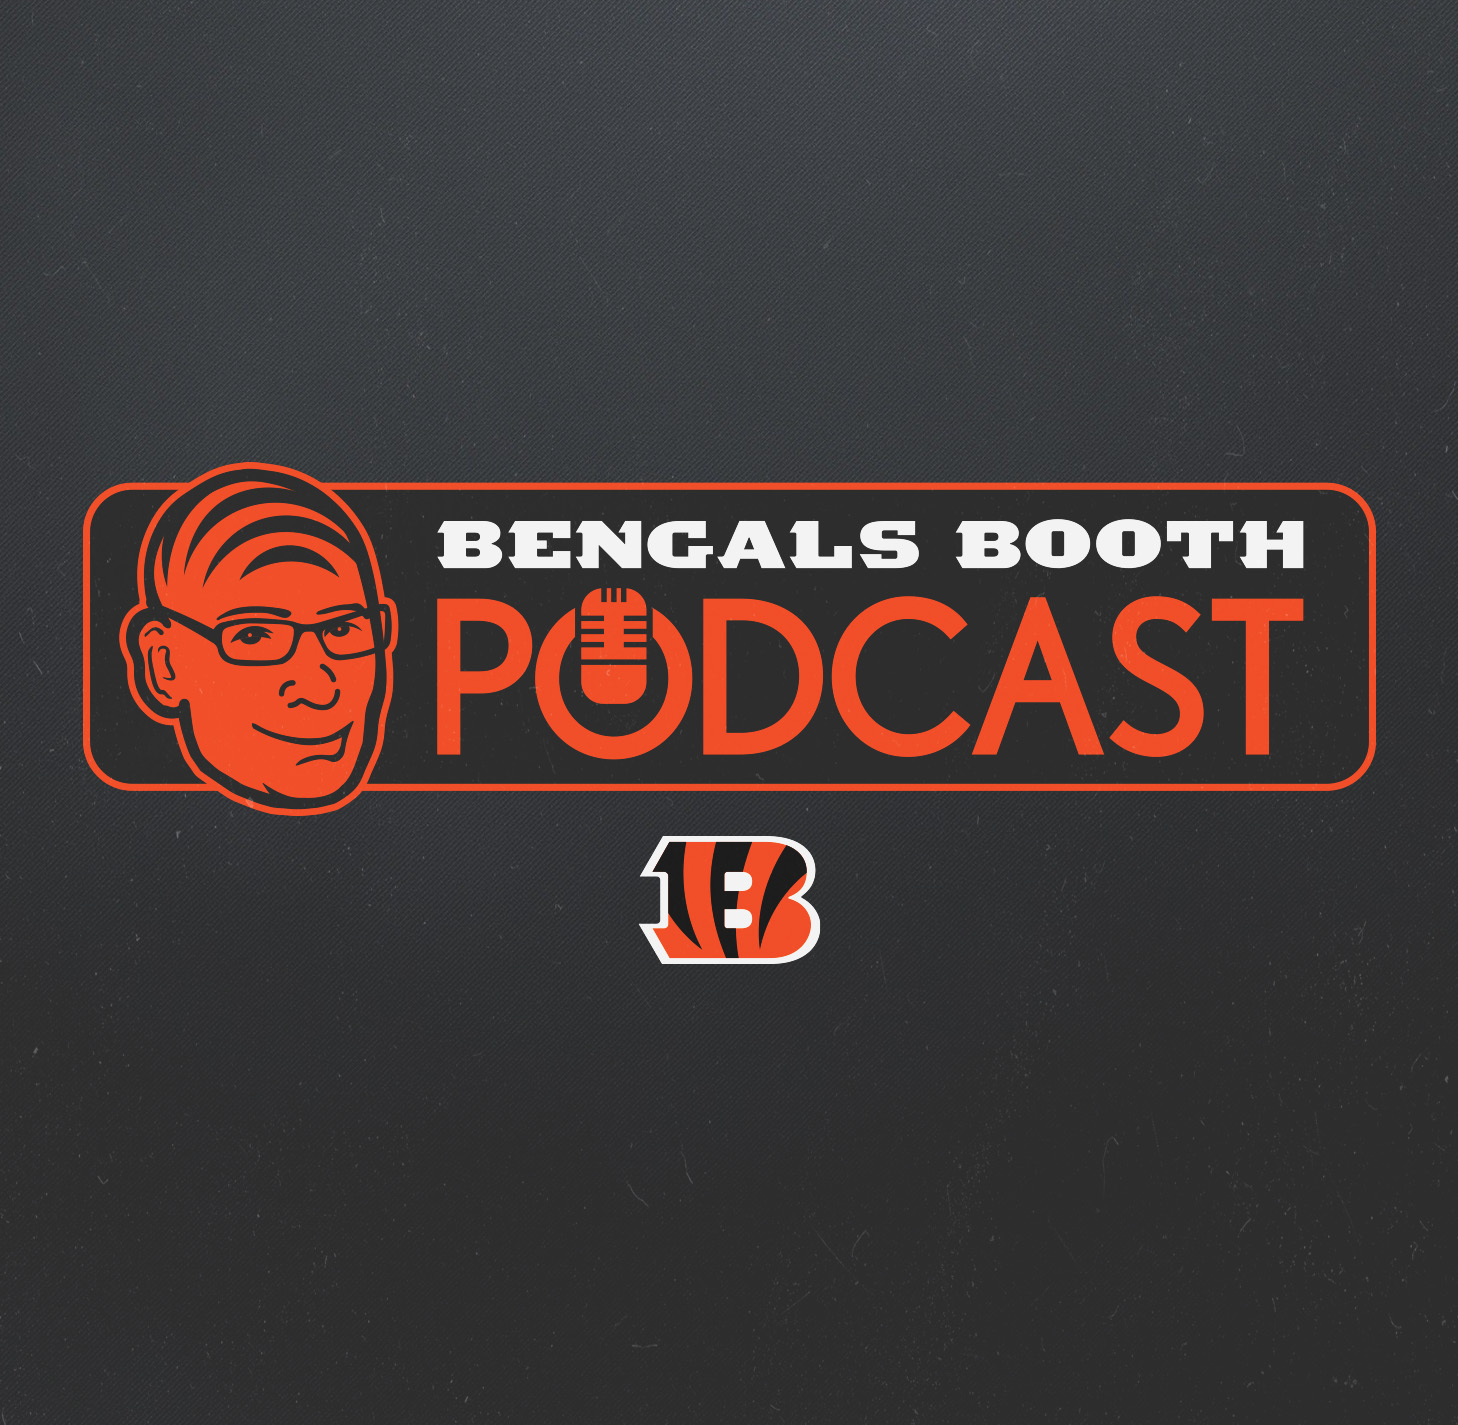 Bengals Booth Podcast: Kings of the Weekend